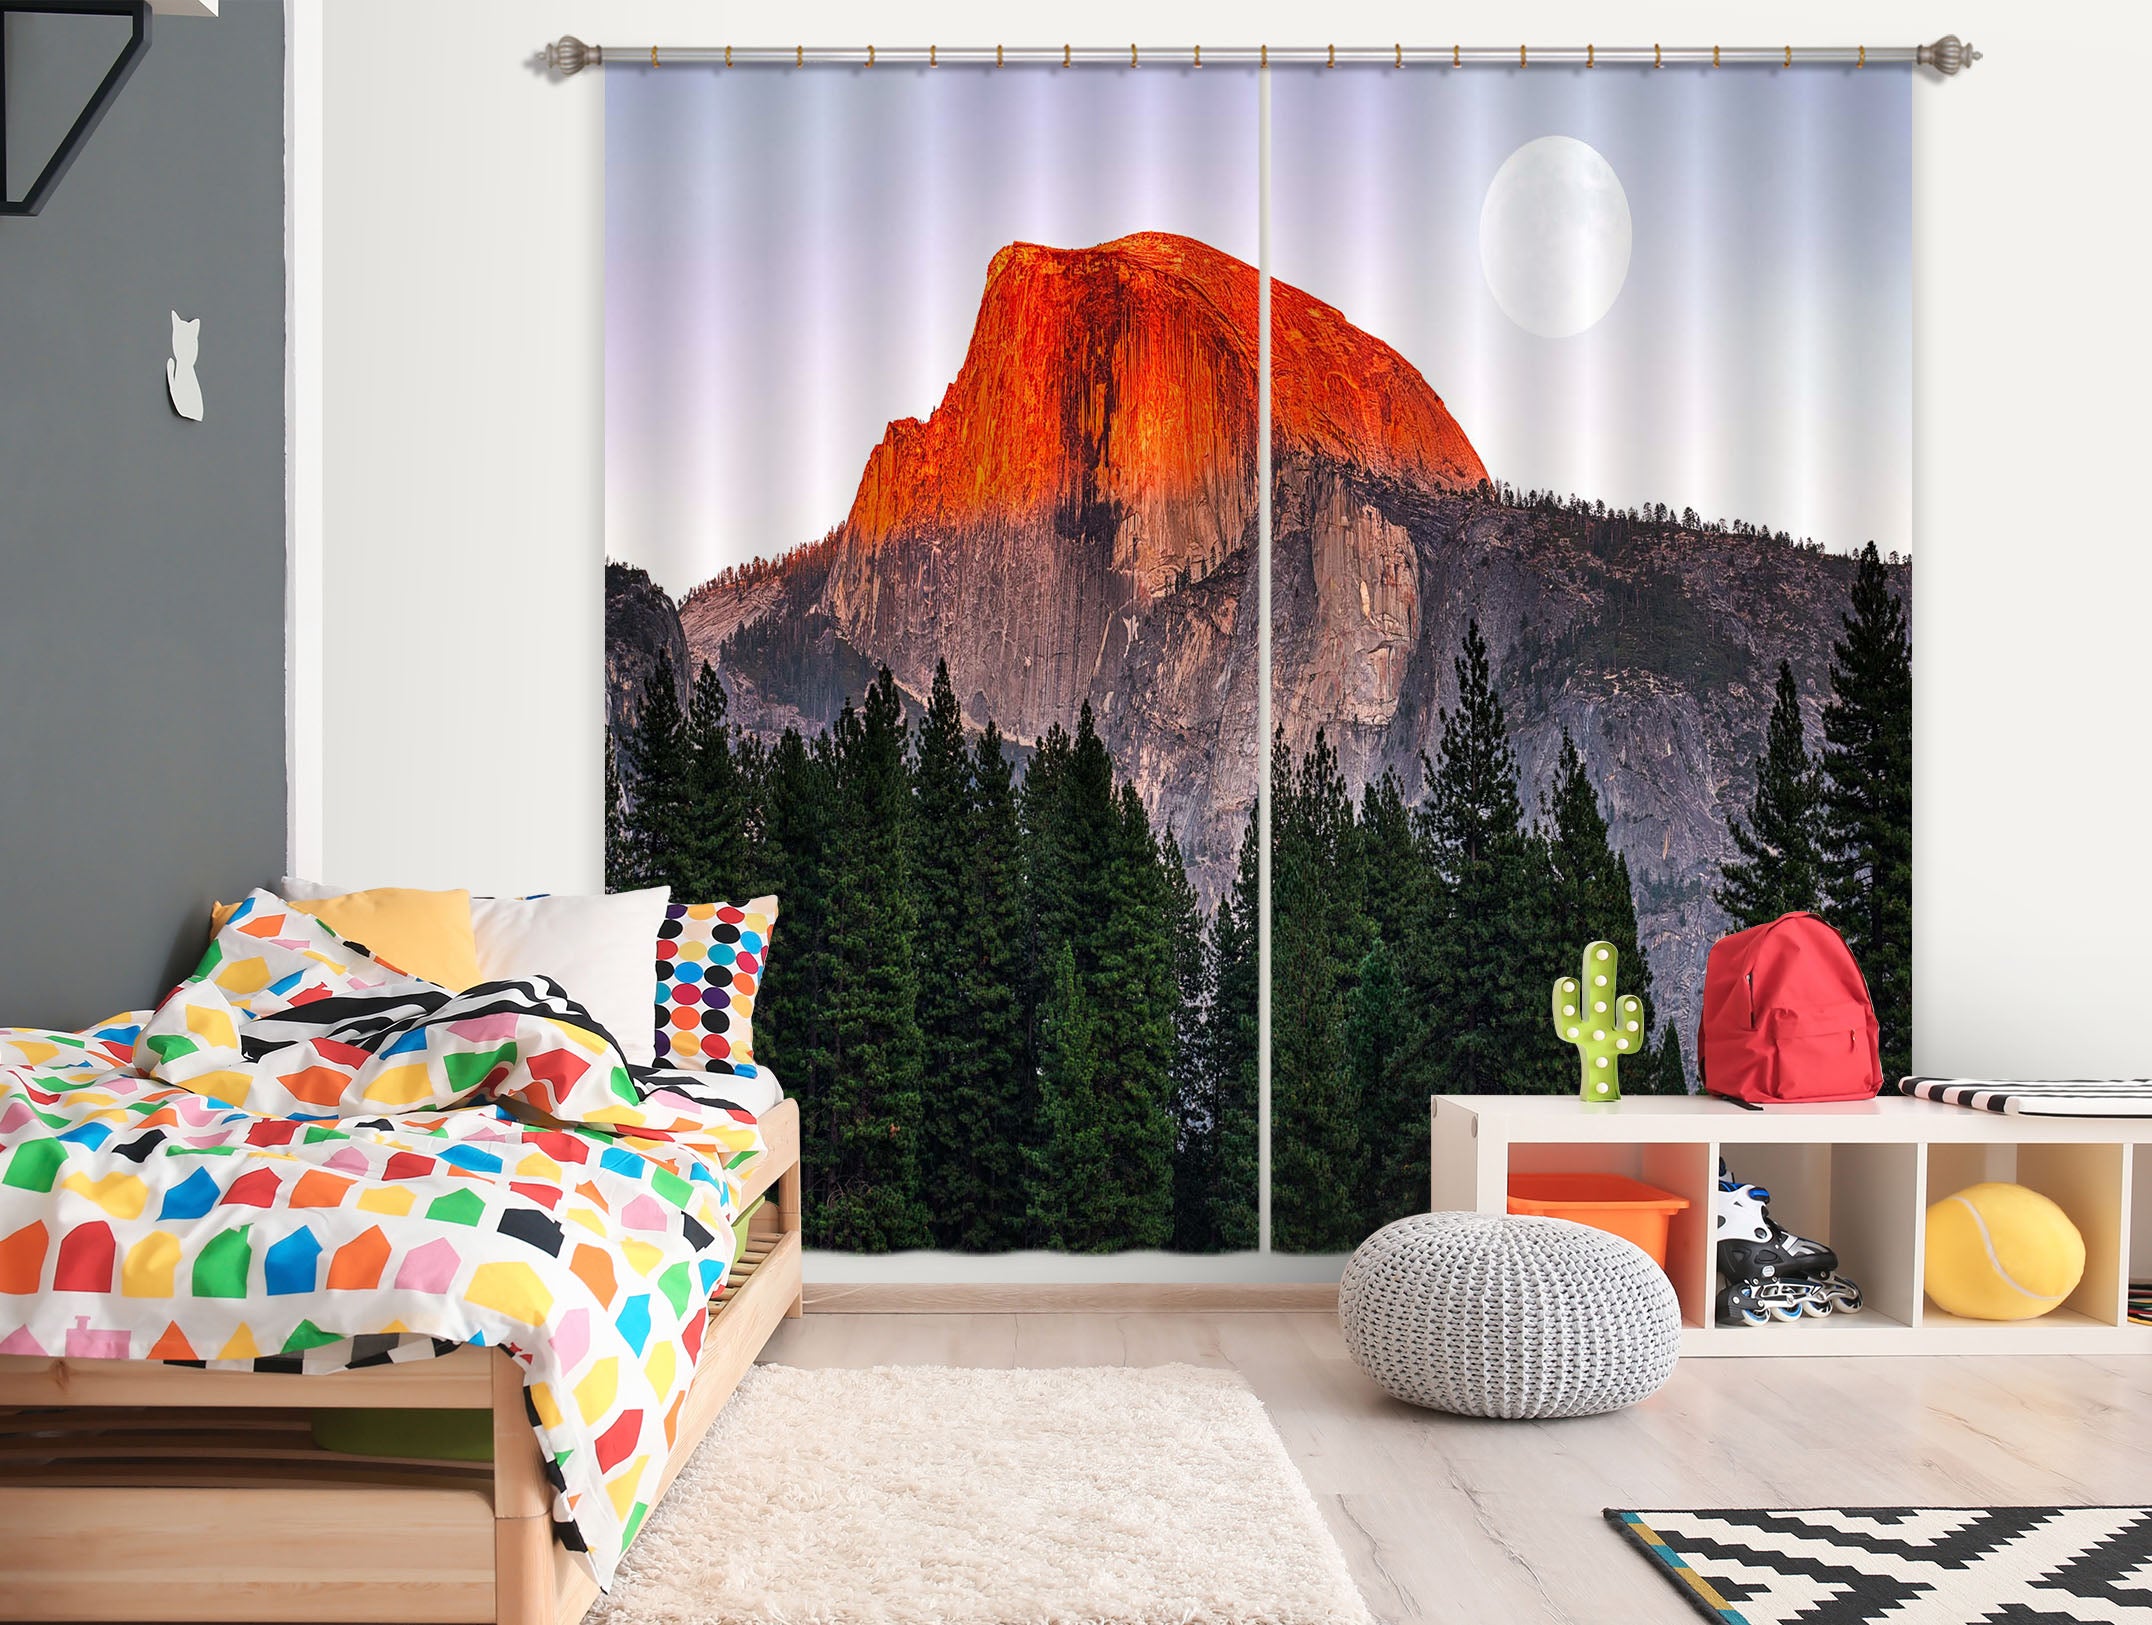 3D Red Mountain Peak 186 Marco Carmassi Curtain Curtains Drapes